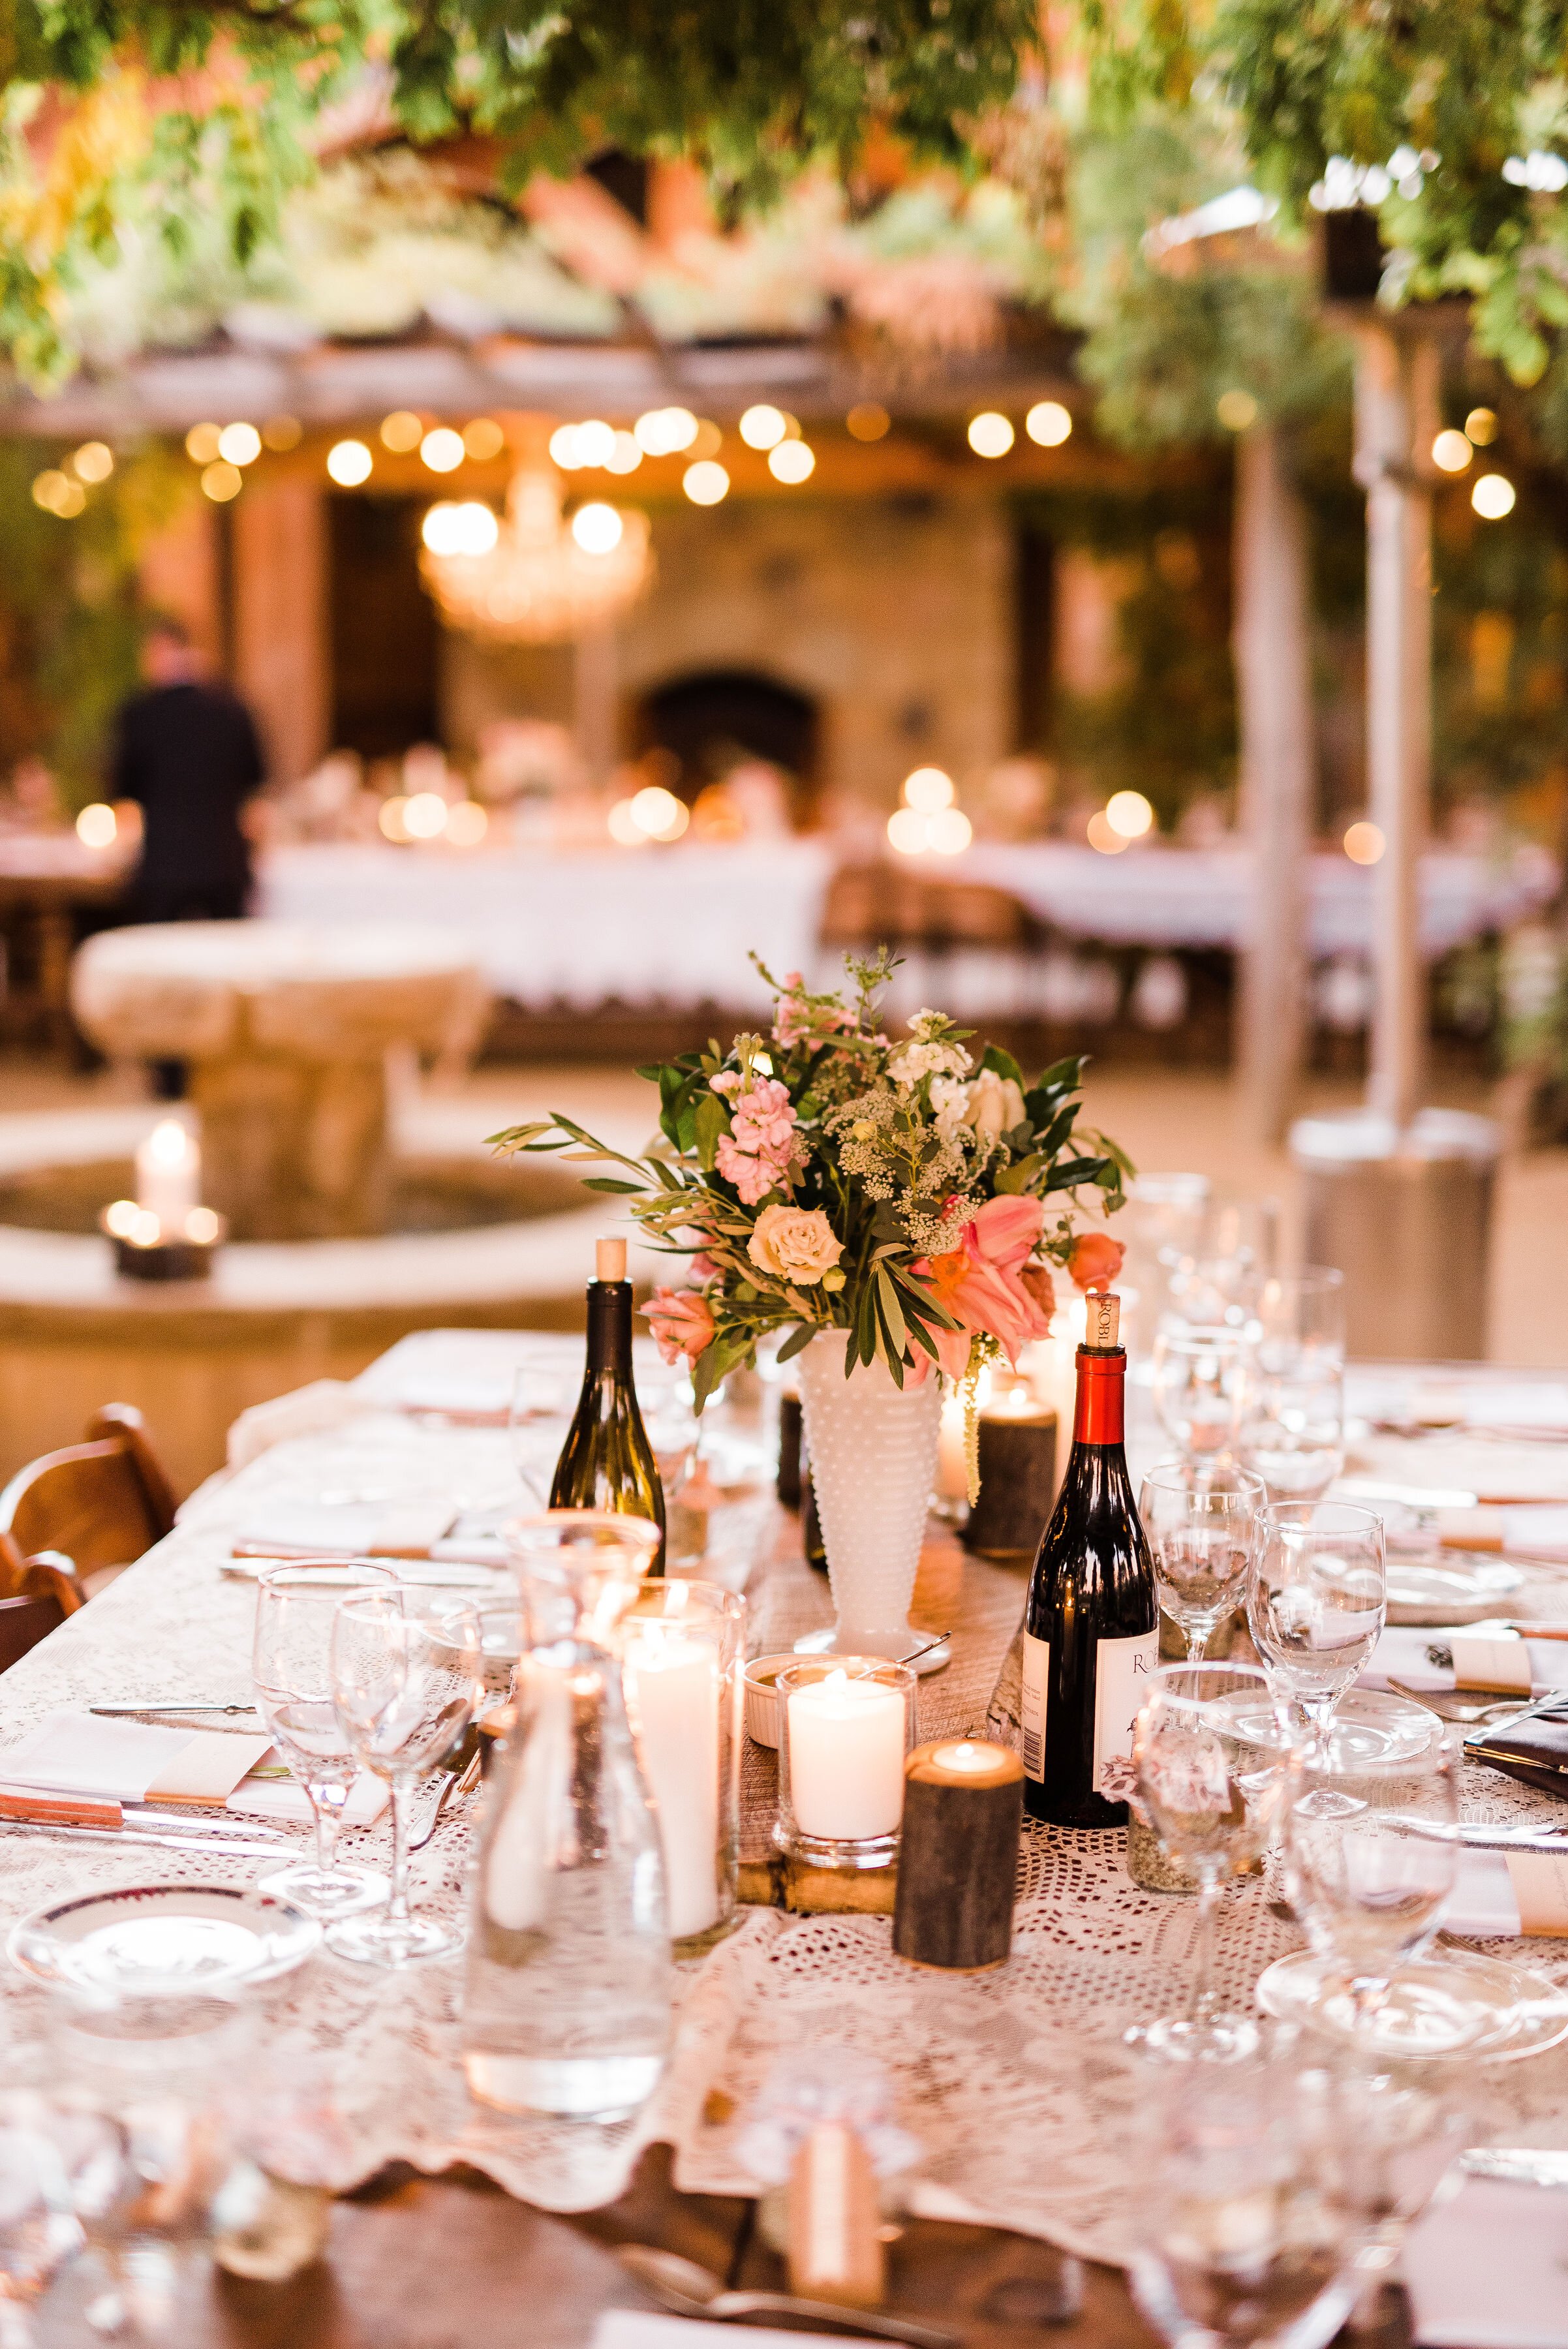 www.santabarbarawedding.com | Roblar Winery and Farm | Brittany Taylor Photography | Reception Tables with String Lights and Candles 